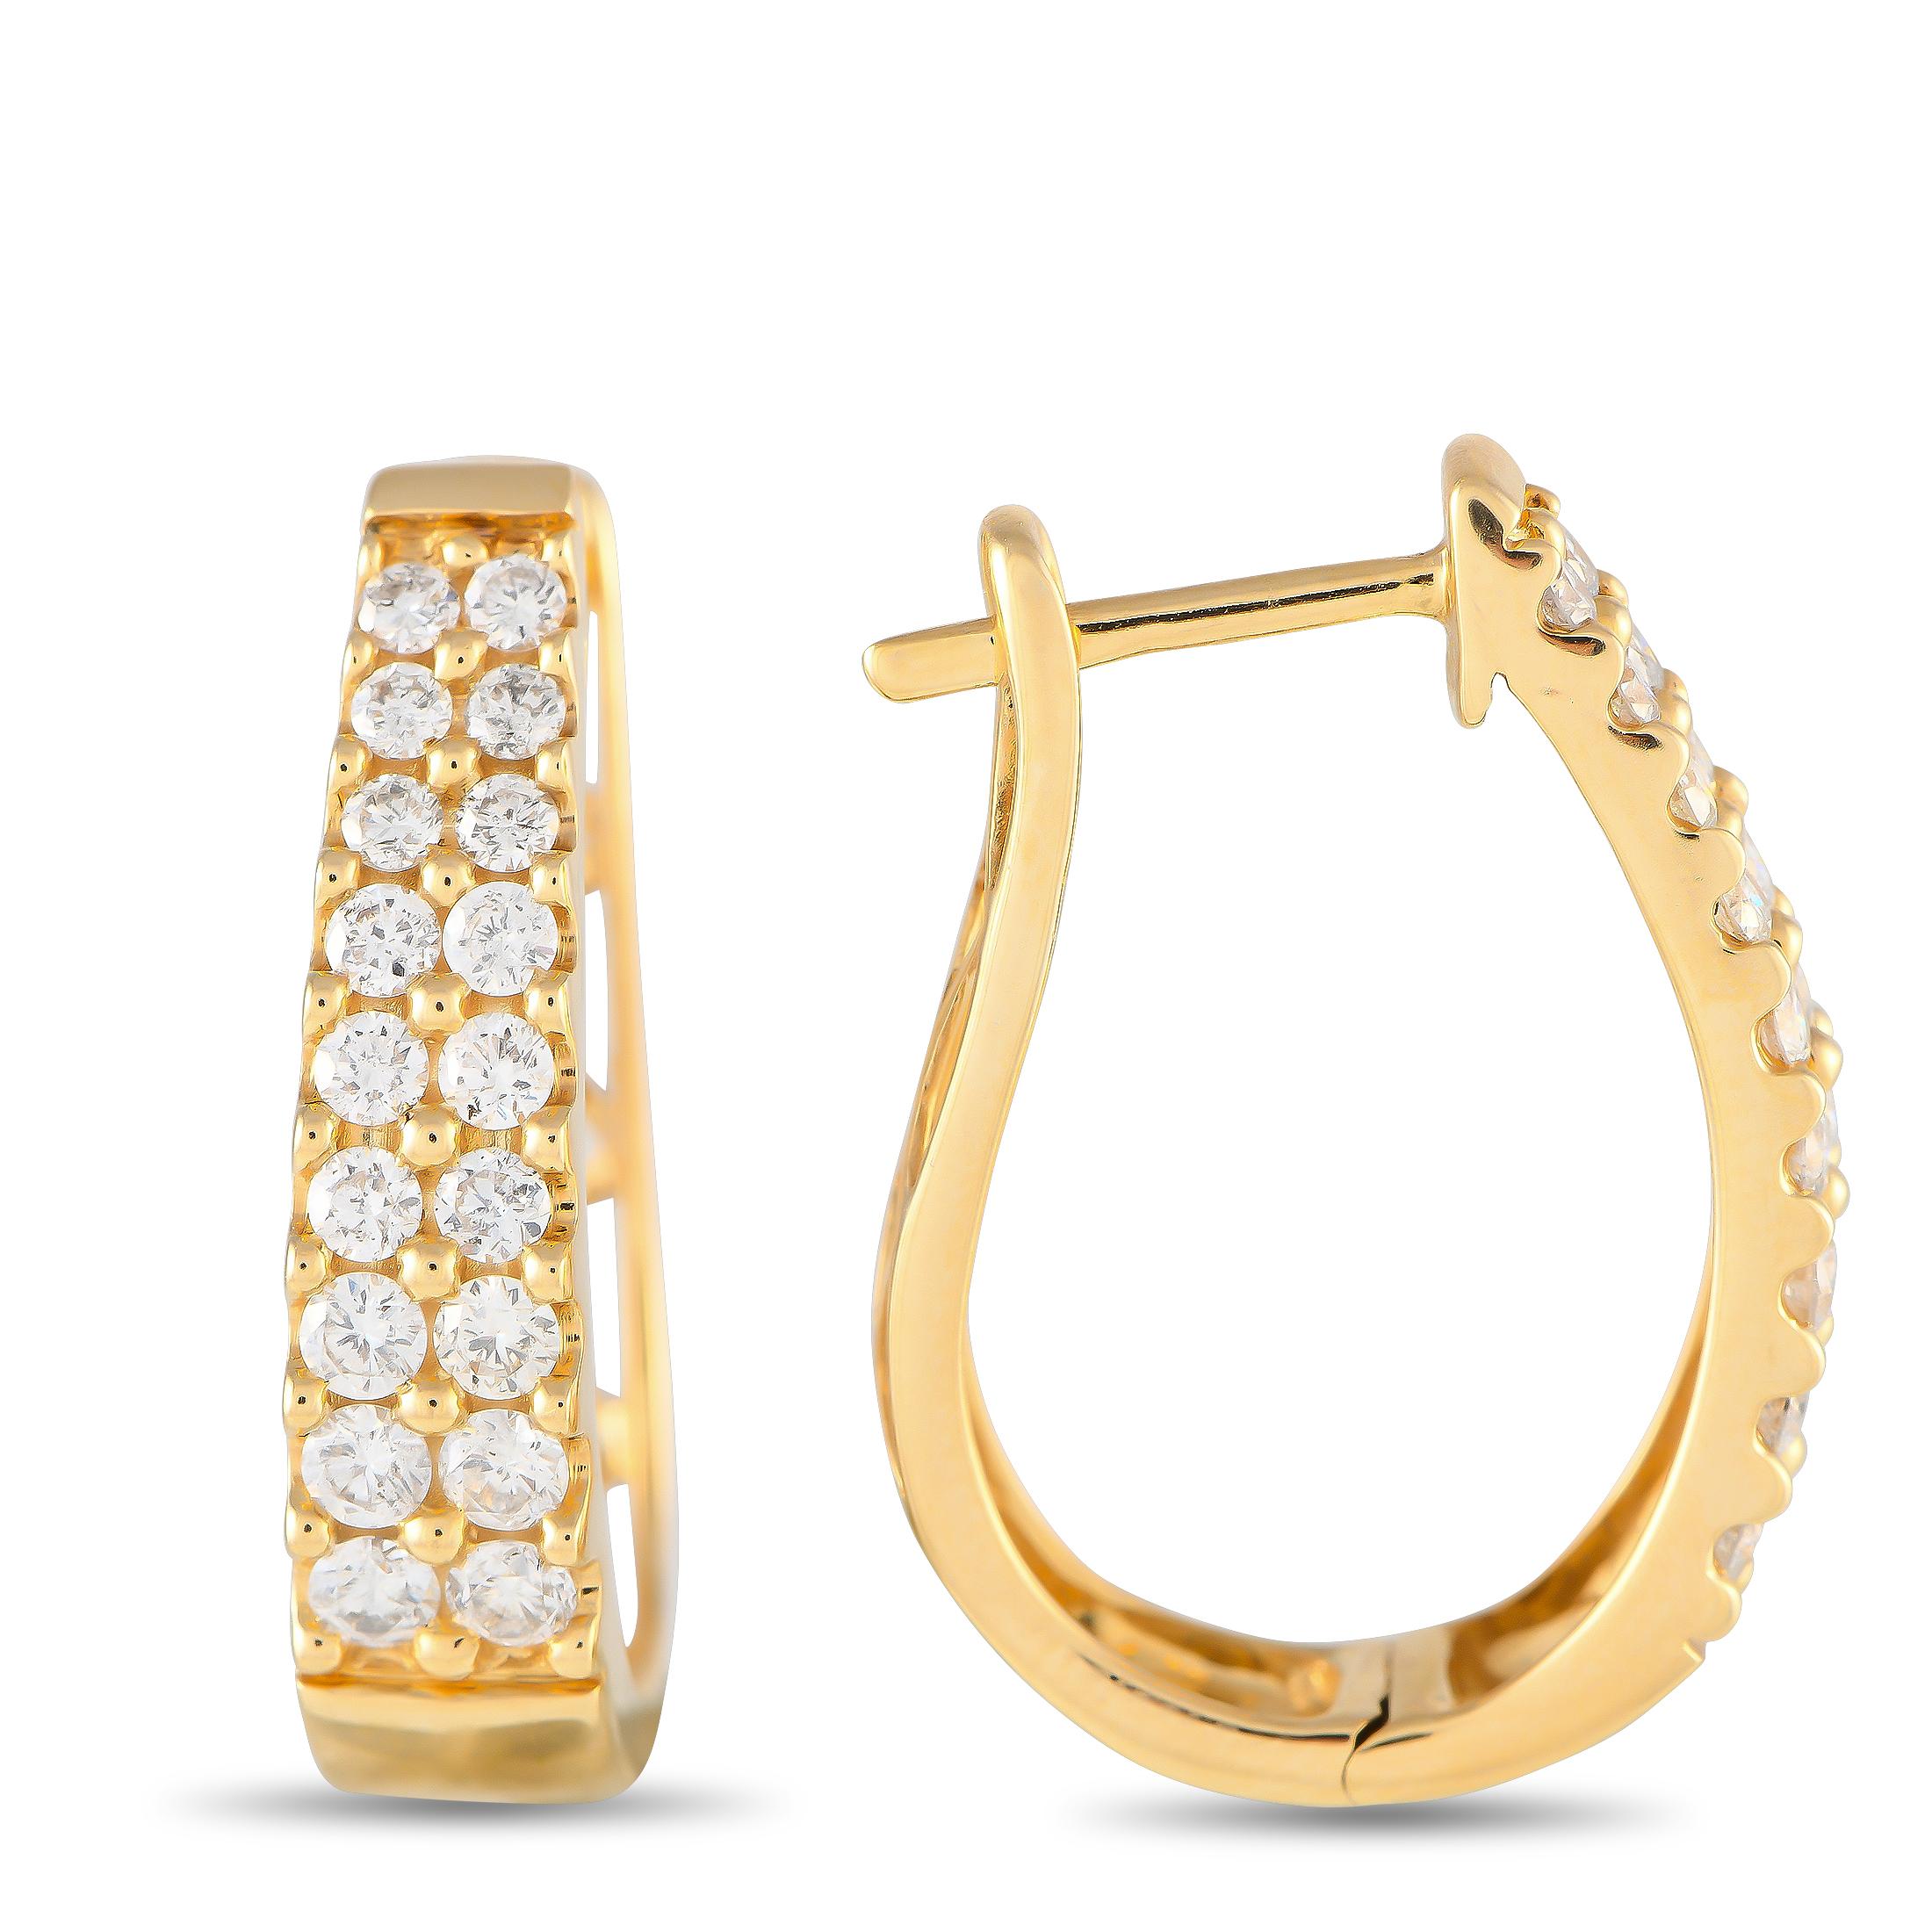 Round-cut Diamonds with a total weight of 1.0 carats make these simple, elegant earrings a luxurious addition to any ensemble. Sleek and sophisticated in design, each one features a 14K Yellow Gold setting measuring 0.85 long by 0.65 wide.This